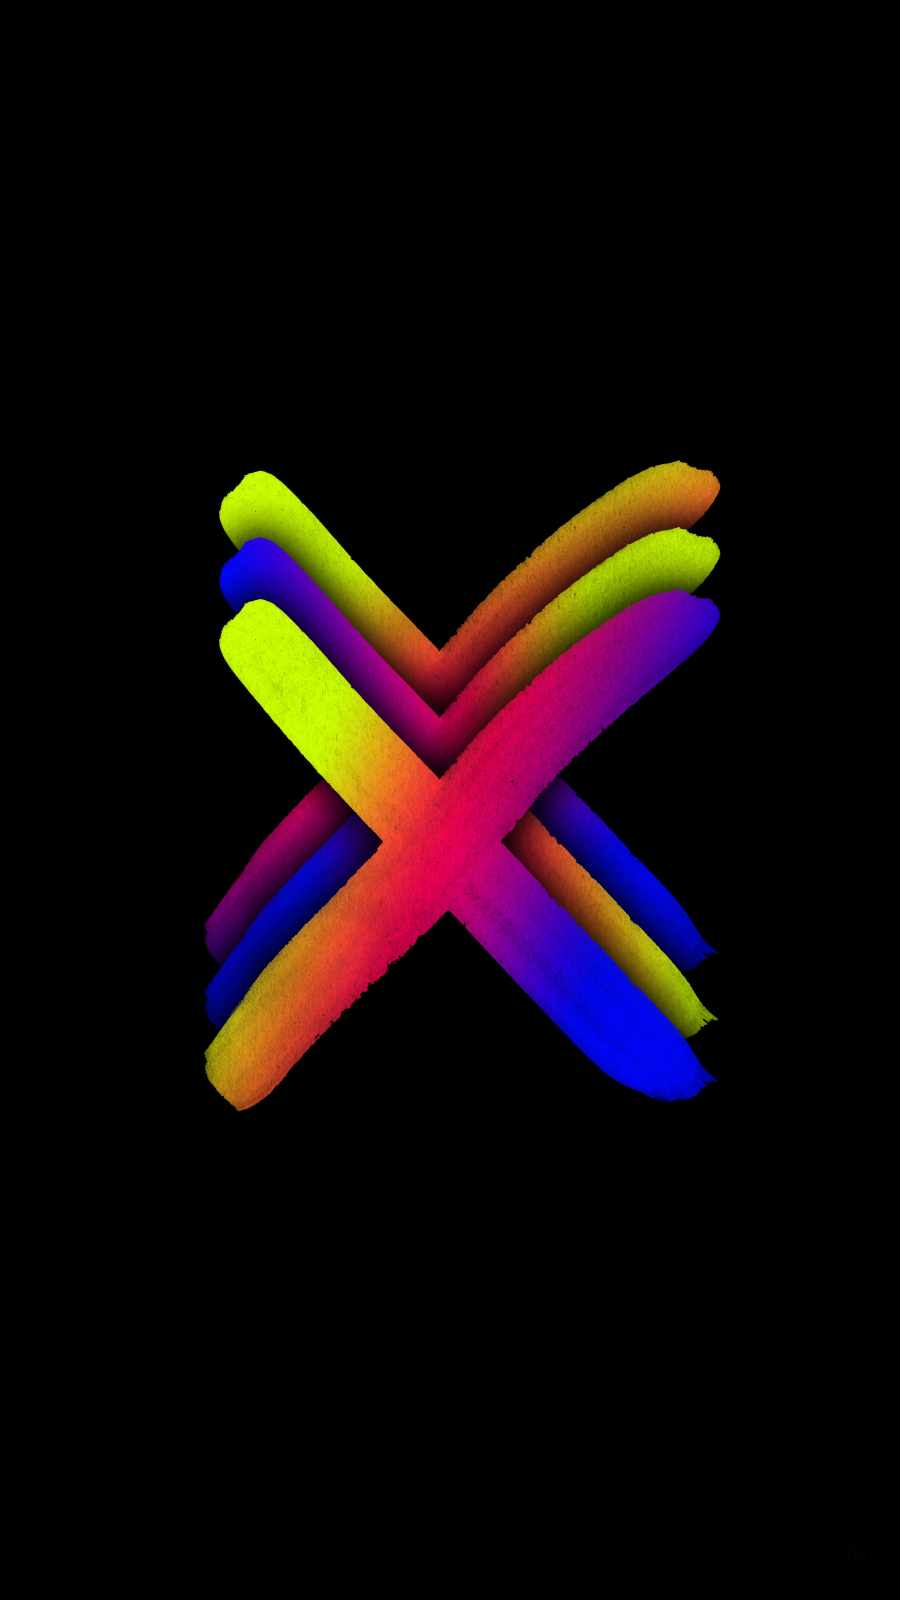 Cross Wallpapers on the App Store